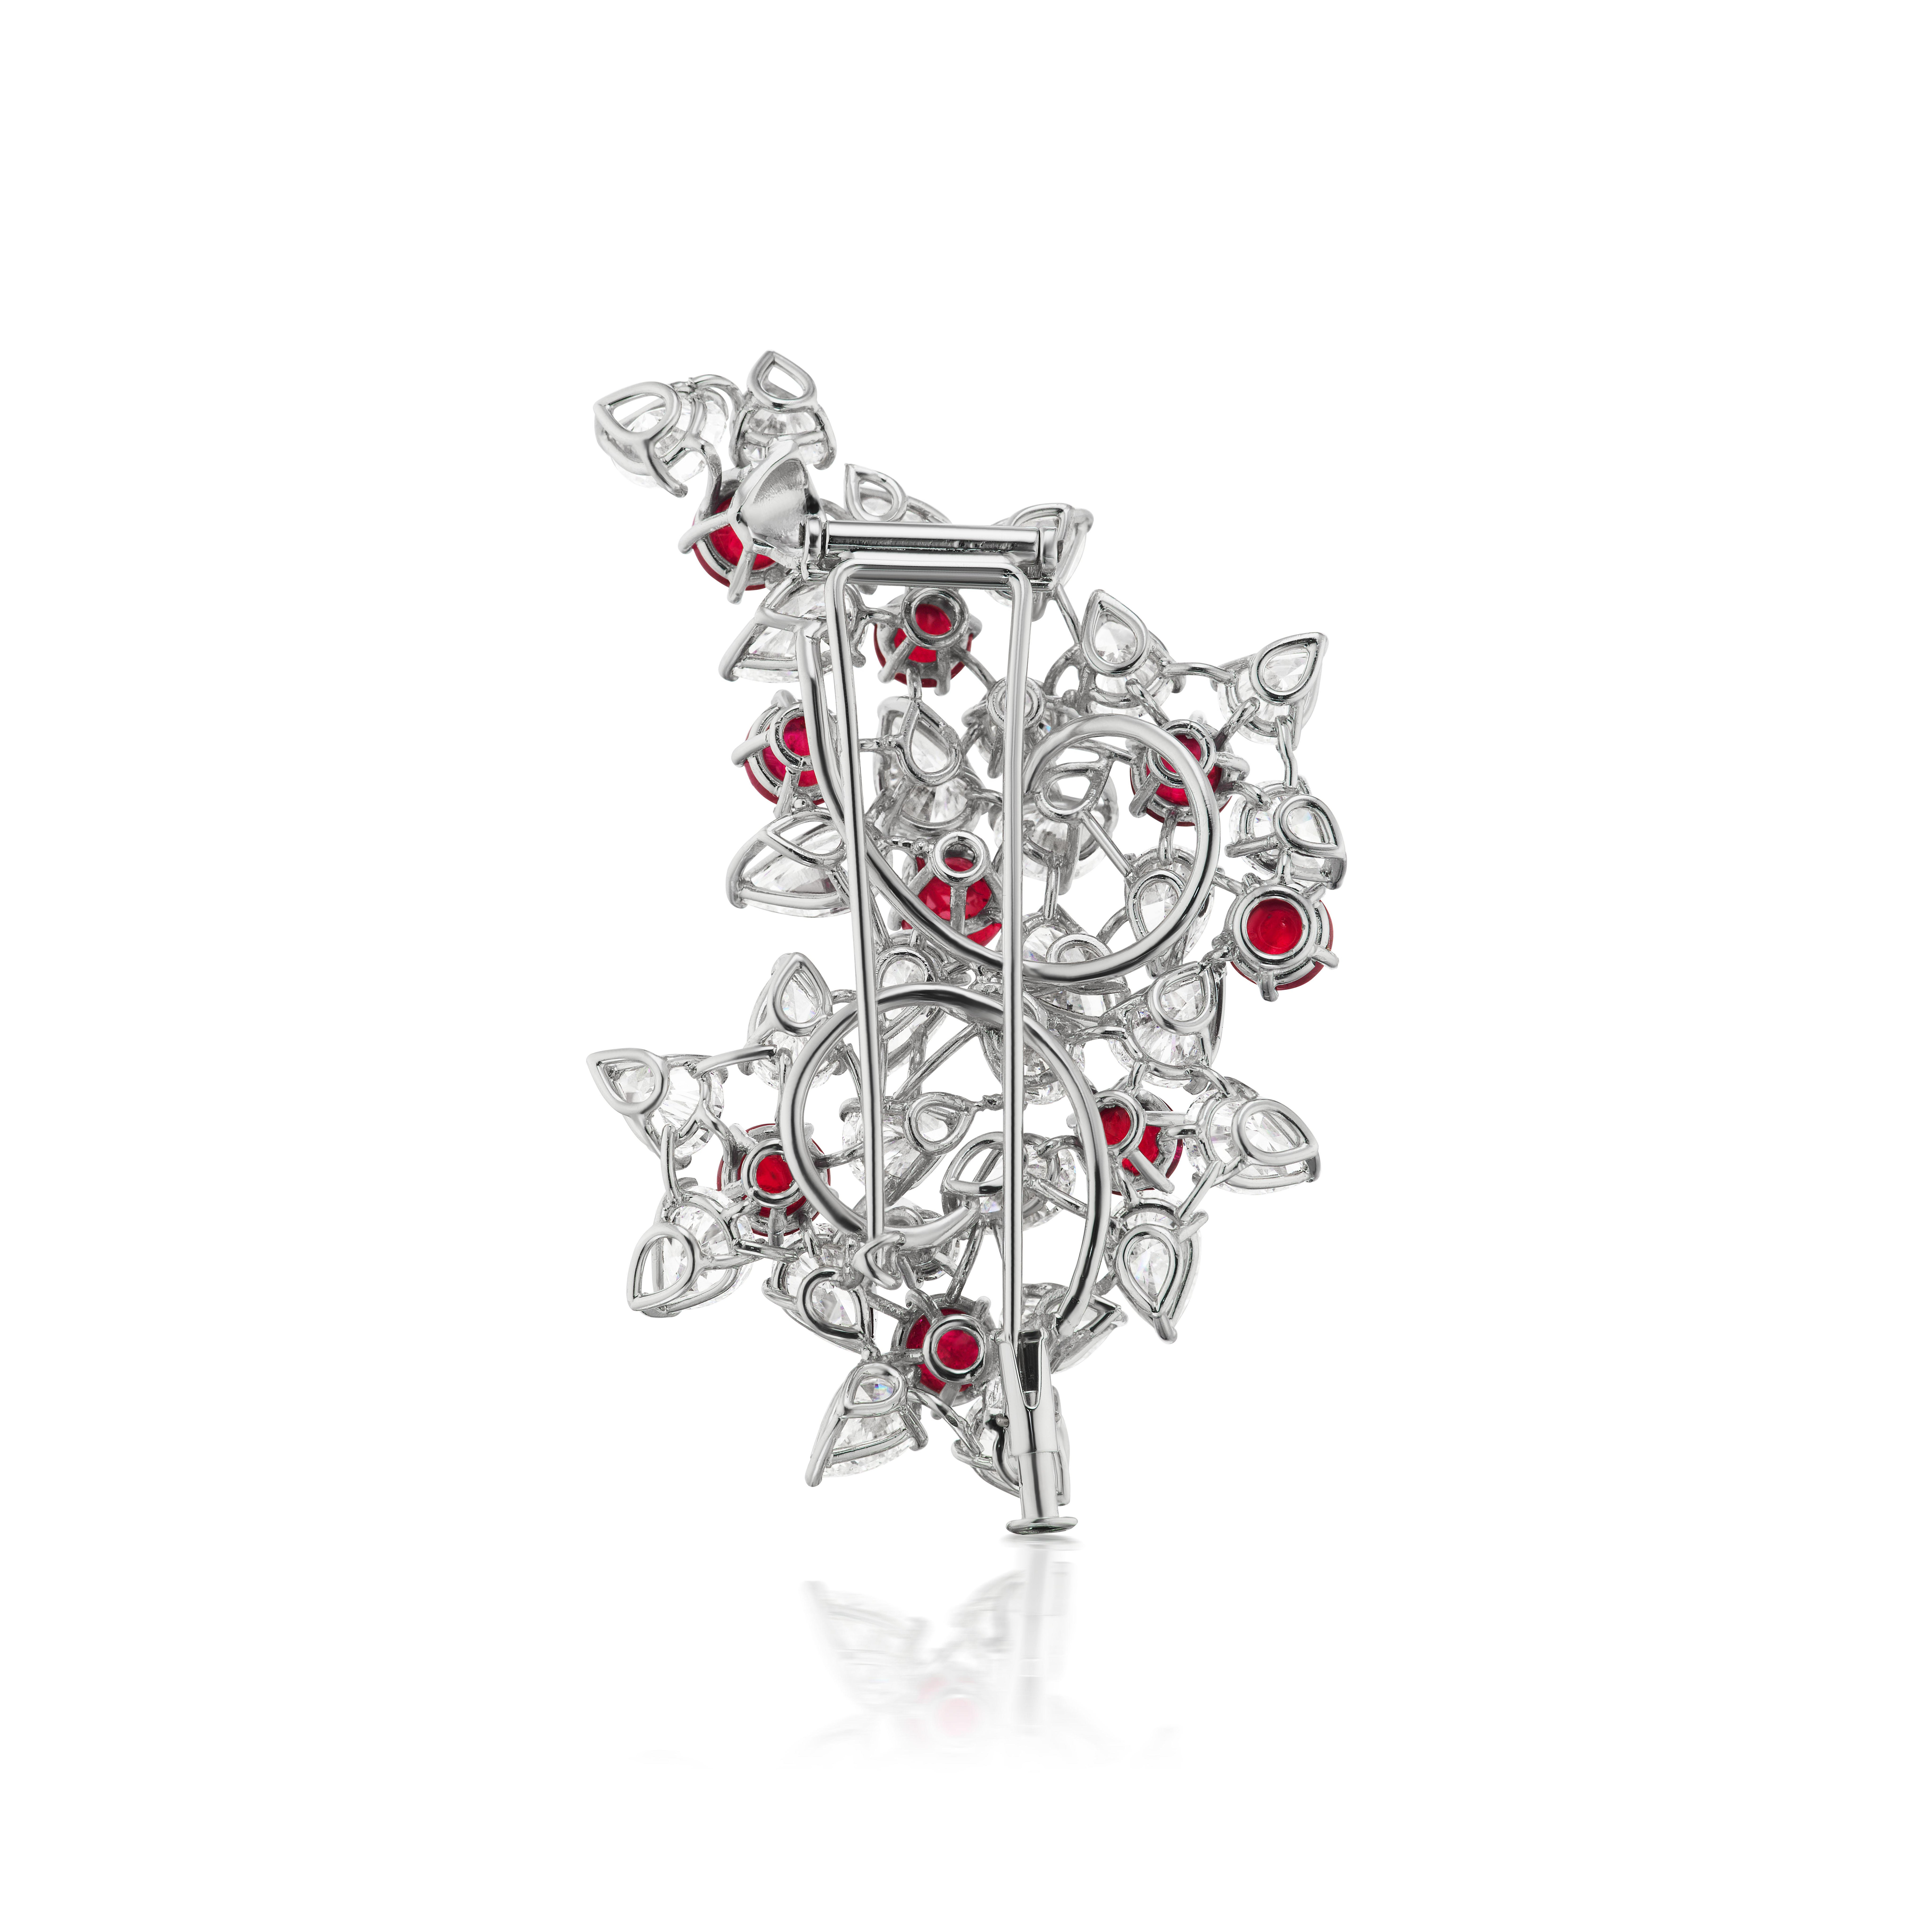 Elevate your Christmas party ensemble with 27 pear-shape and 2 round-brilliant diamonds weighing approximately 13.86 carats laid out in an intricate and delightful mistletoe design accentuated by 9 vivid red cabochon rubies weighing approximately 4